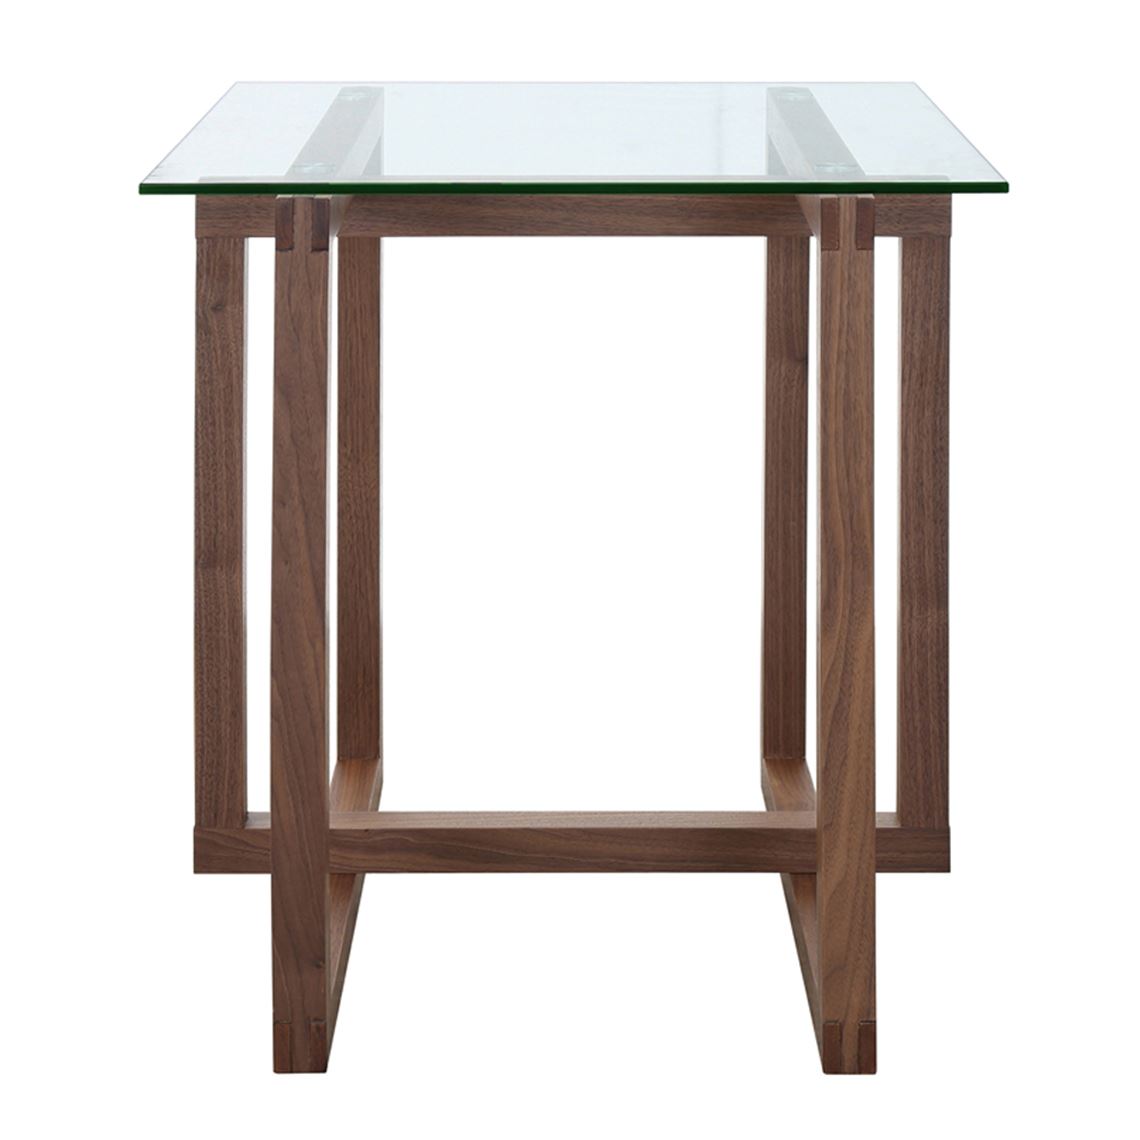 all tables coffee console side table freedom kyra gumtree perth armchair emerald green accent chair round dining set for sagging couch large cream throw cool ott west elm end car